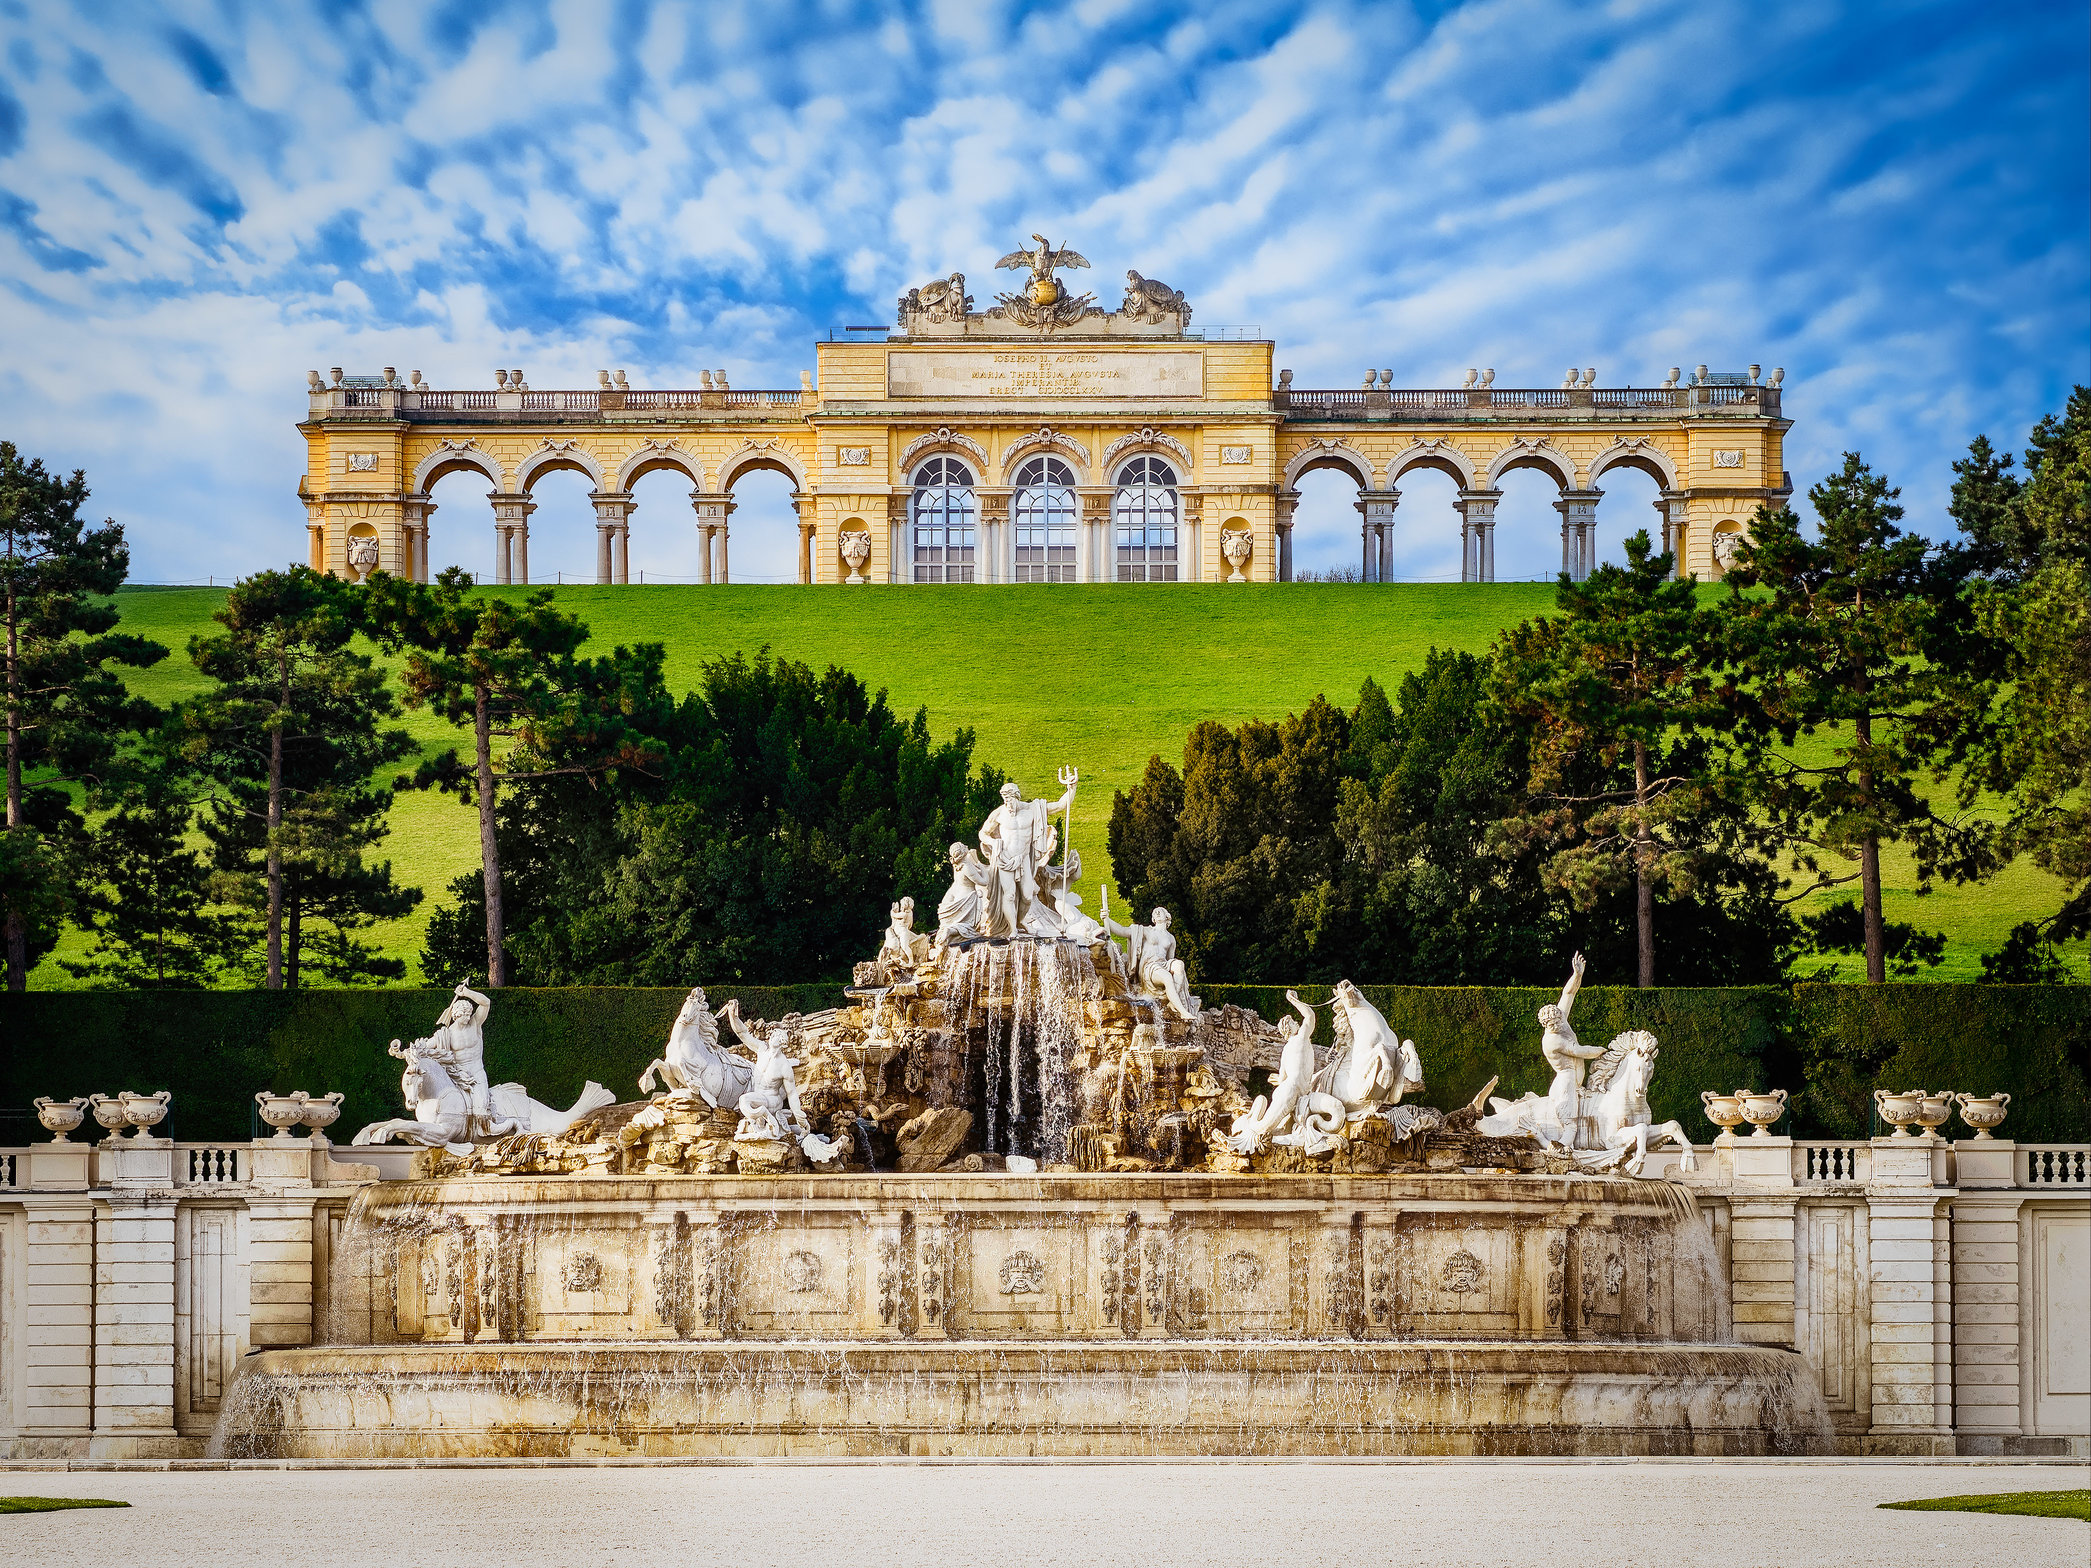 palace on grassy hill, fountain in foreground